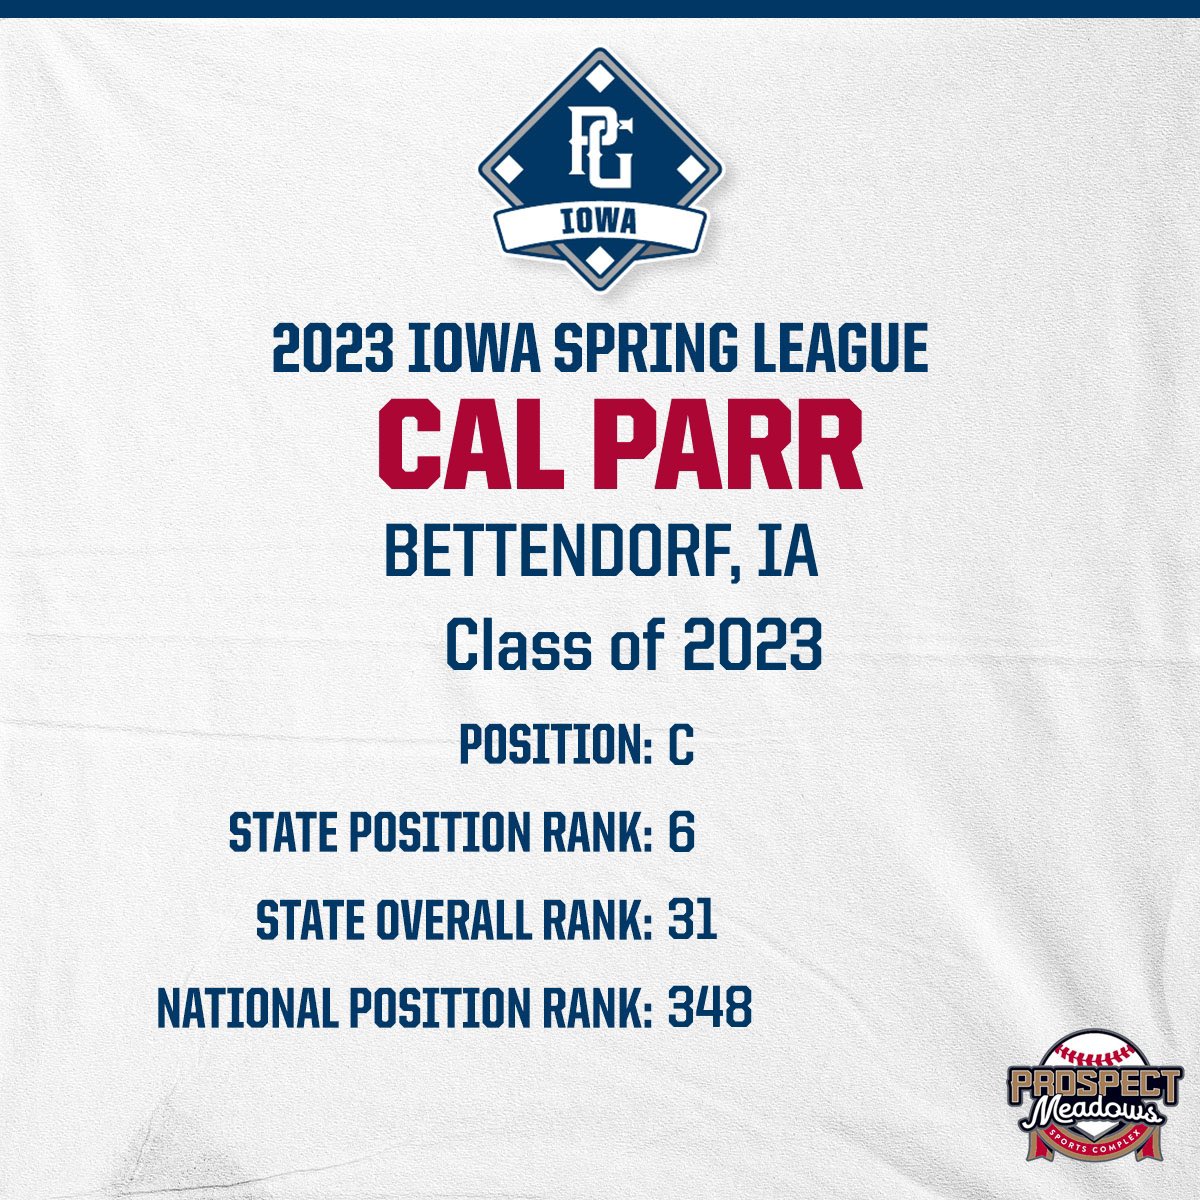 PLAYER SPOTLIGHT Cal Parr A C from Bettendorf, IA!